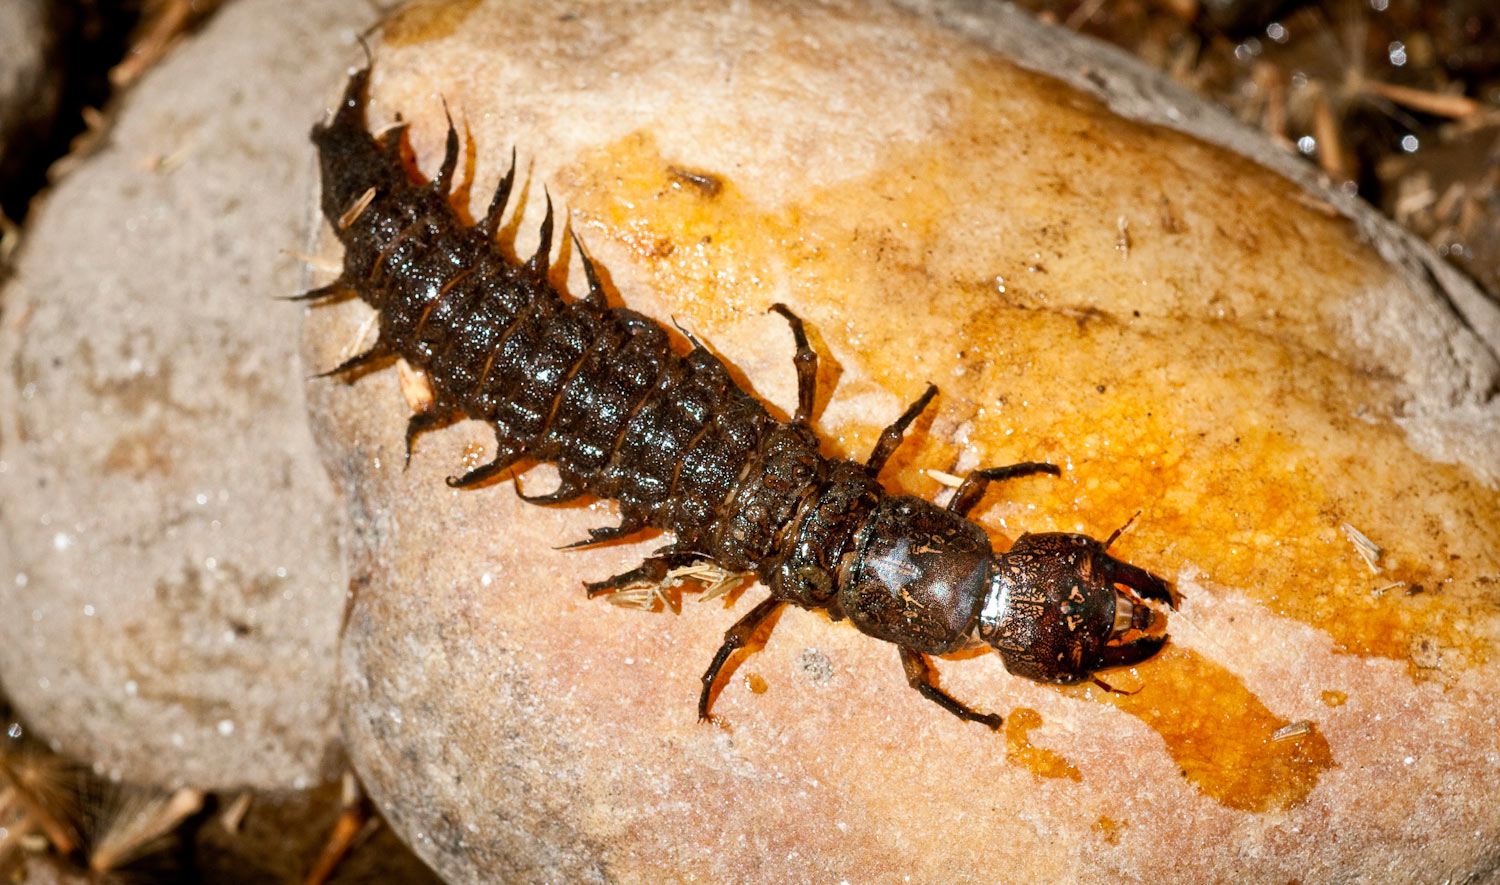 hellgrammites at Stroud: 'King Kong' of water insects - Natural Lands